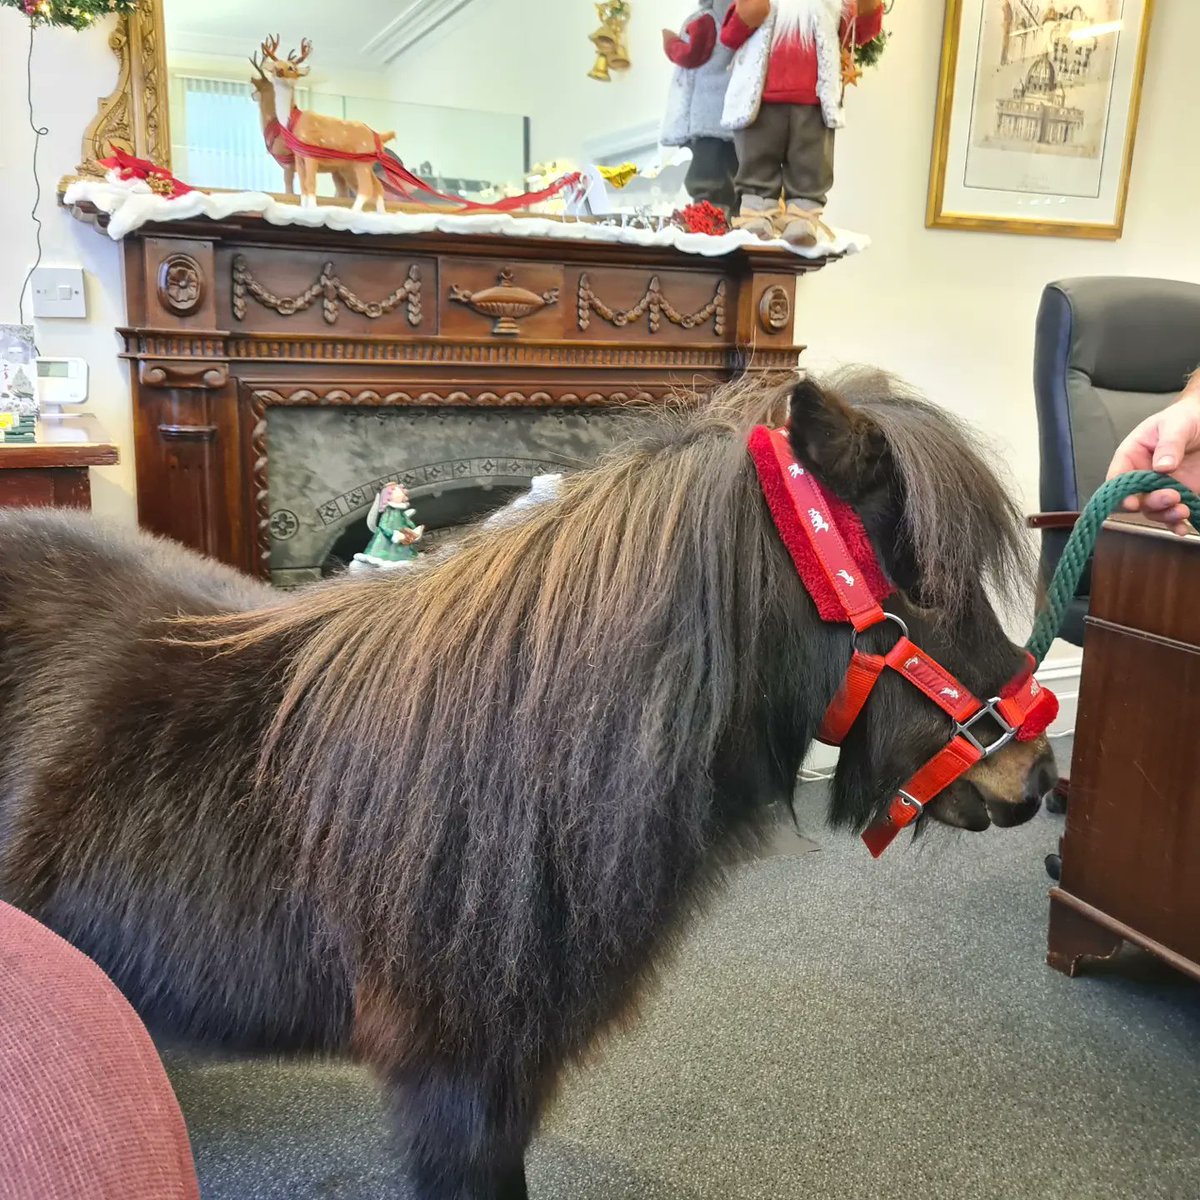 We had a lovely visit from #PatrickthePony yesterday ❤️🐴. For those who have not met Patrick, he's a beautiful miniature Shetland Pony undertaking equine therapy in the local community, which we have been proud to support. #therapypony #pony #torquay #torbay #communitypony